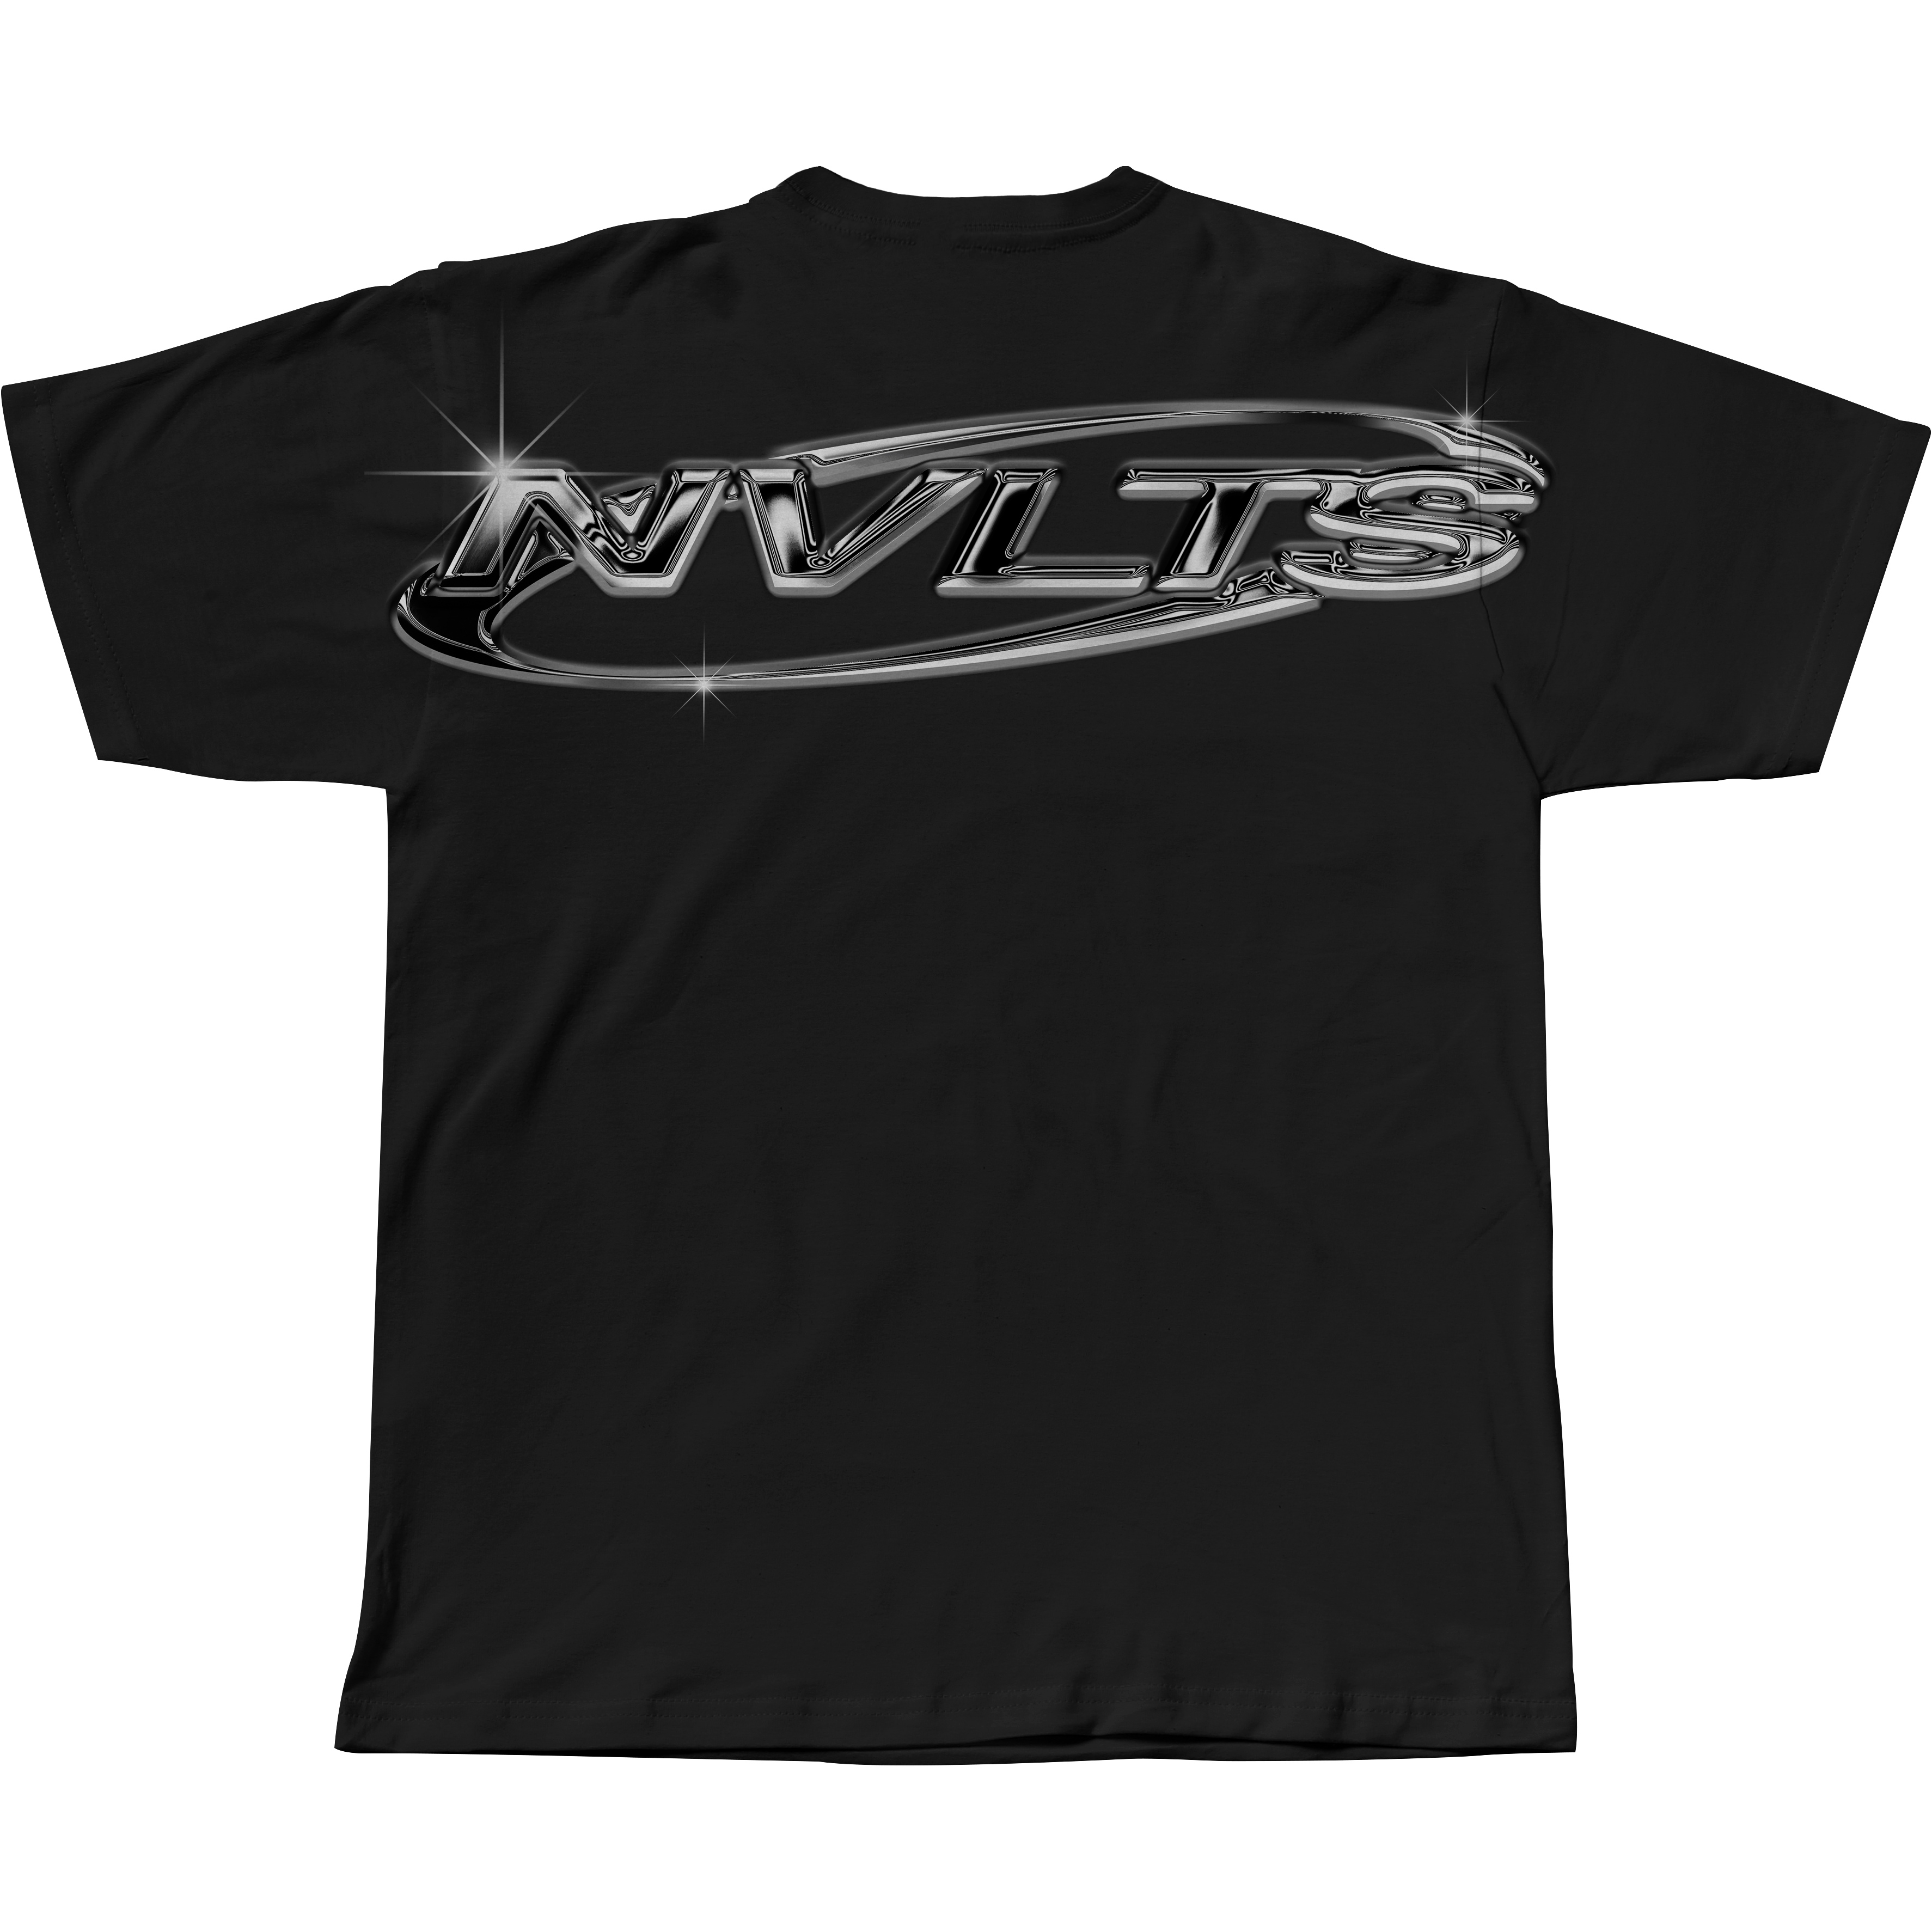 NVLTS "Rally" Chrome Drop Shoulder Oversized Tee - Black and Chrome